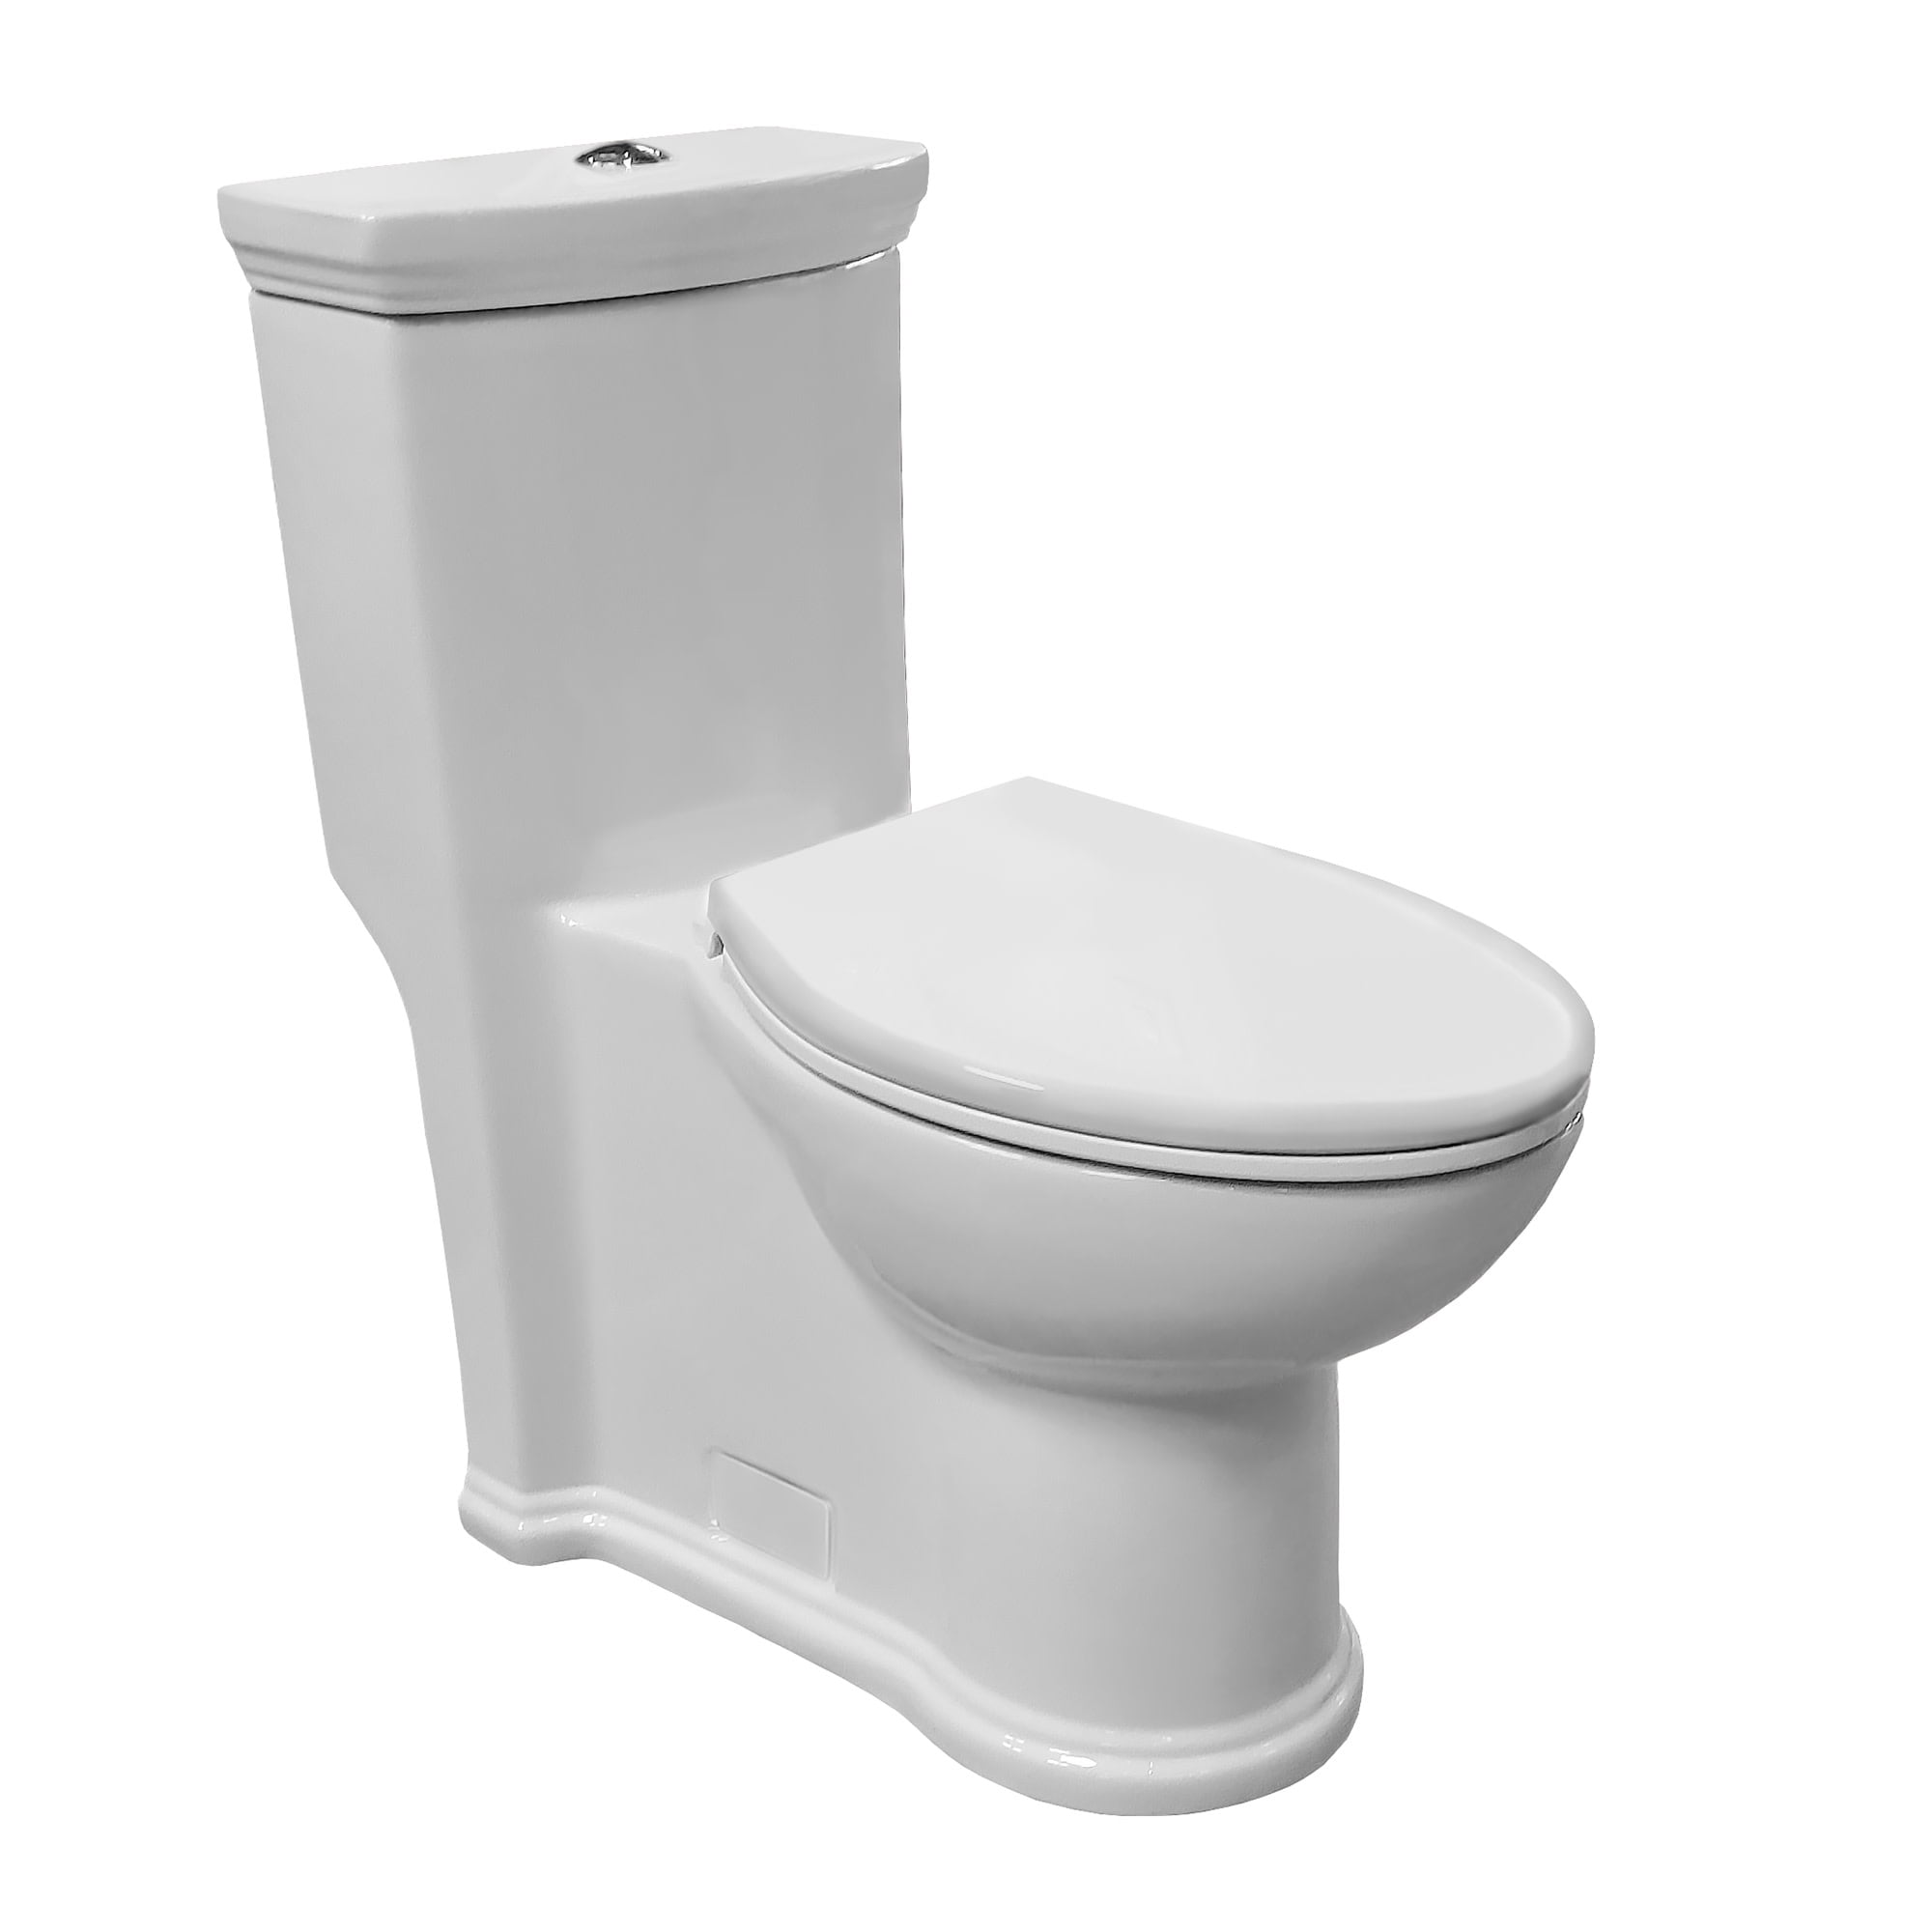 Whmfl3364-eb Magic Flush Collection Eco-friendly One Piece Toilet With A Siphonic Action Dual Flush System